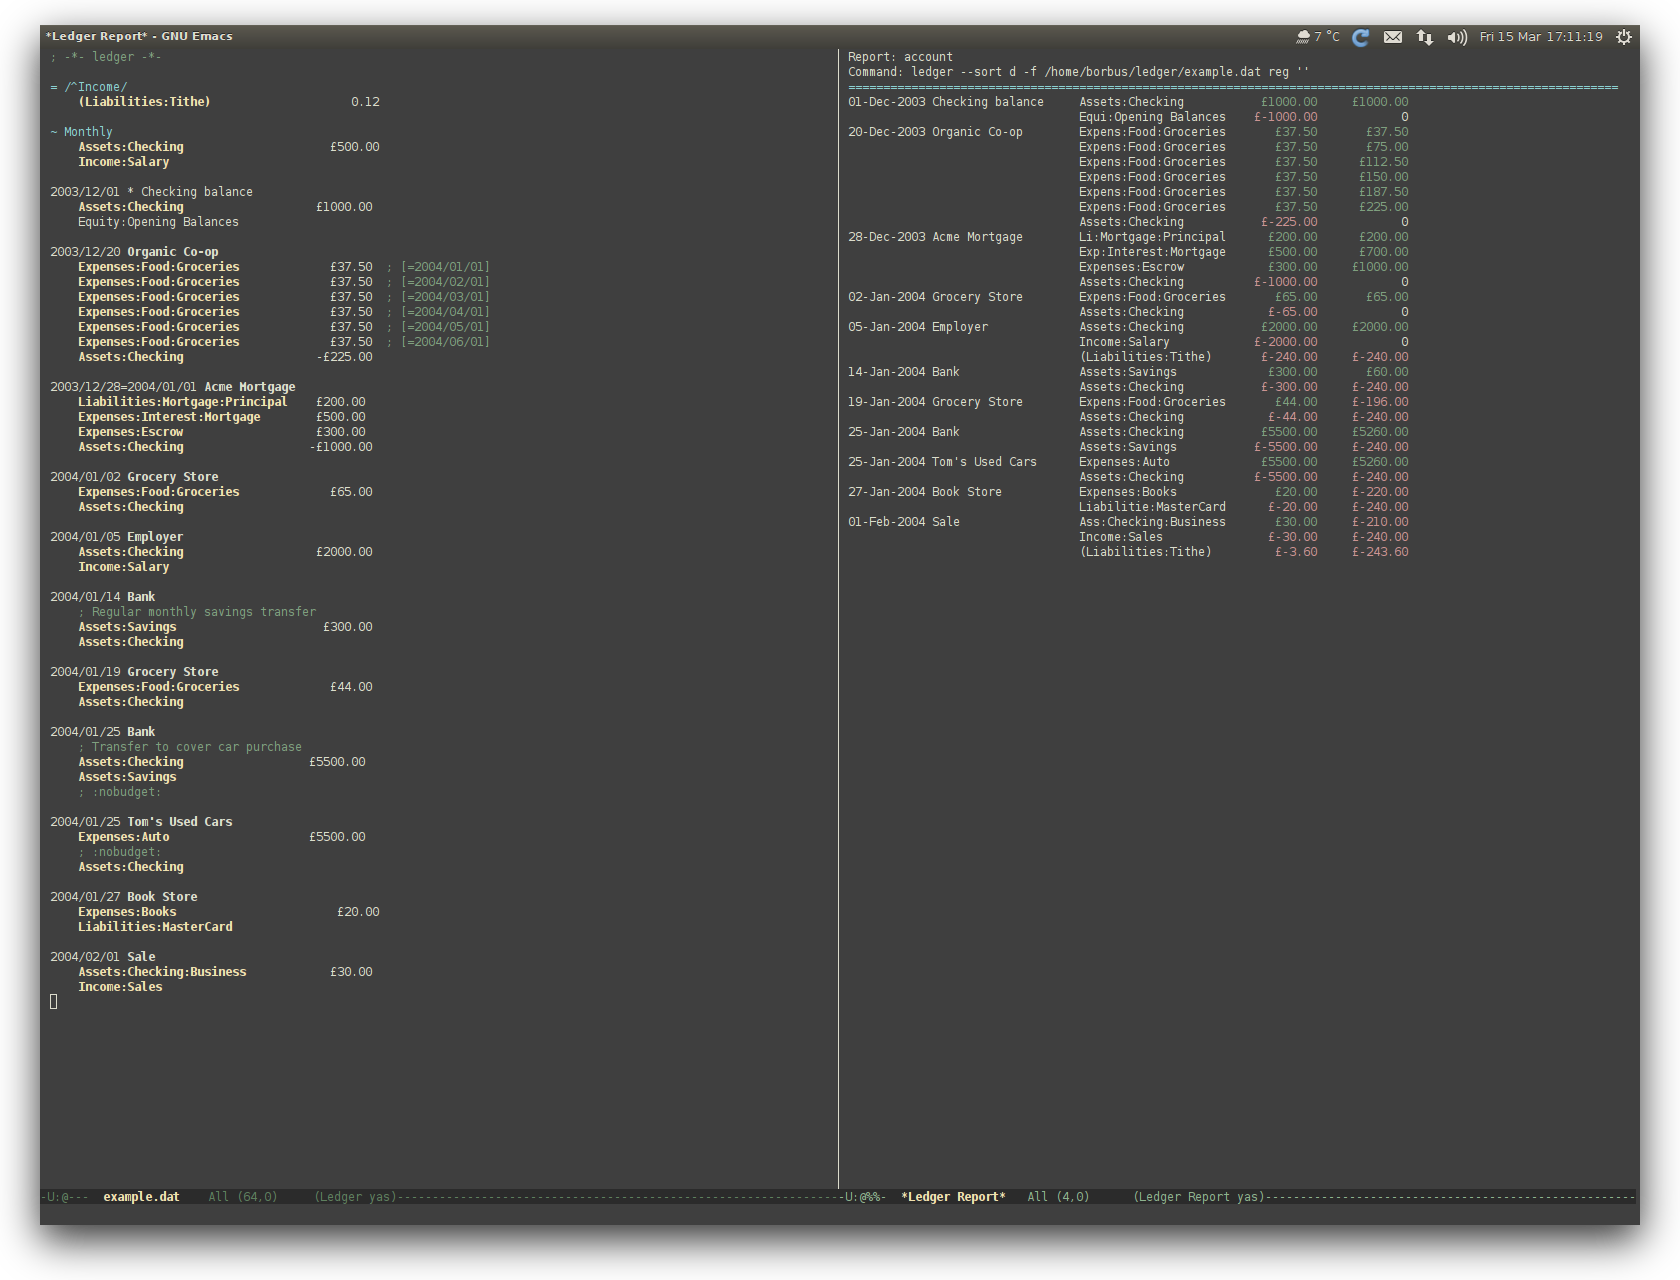 /TakeV/spacemacs/media/commit/08a1bd91bc57b26679aa94be59a196f2323f93b0/contrib/finance/img/ledger.png